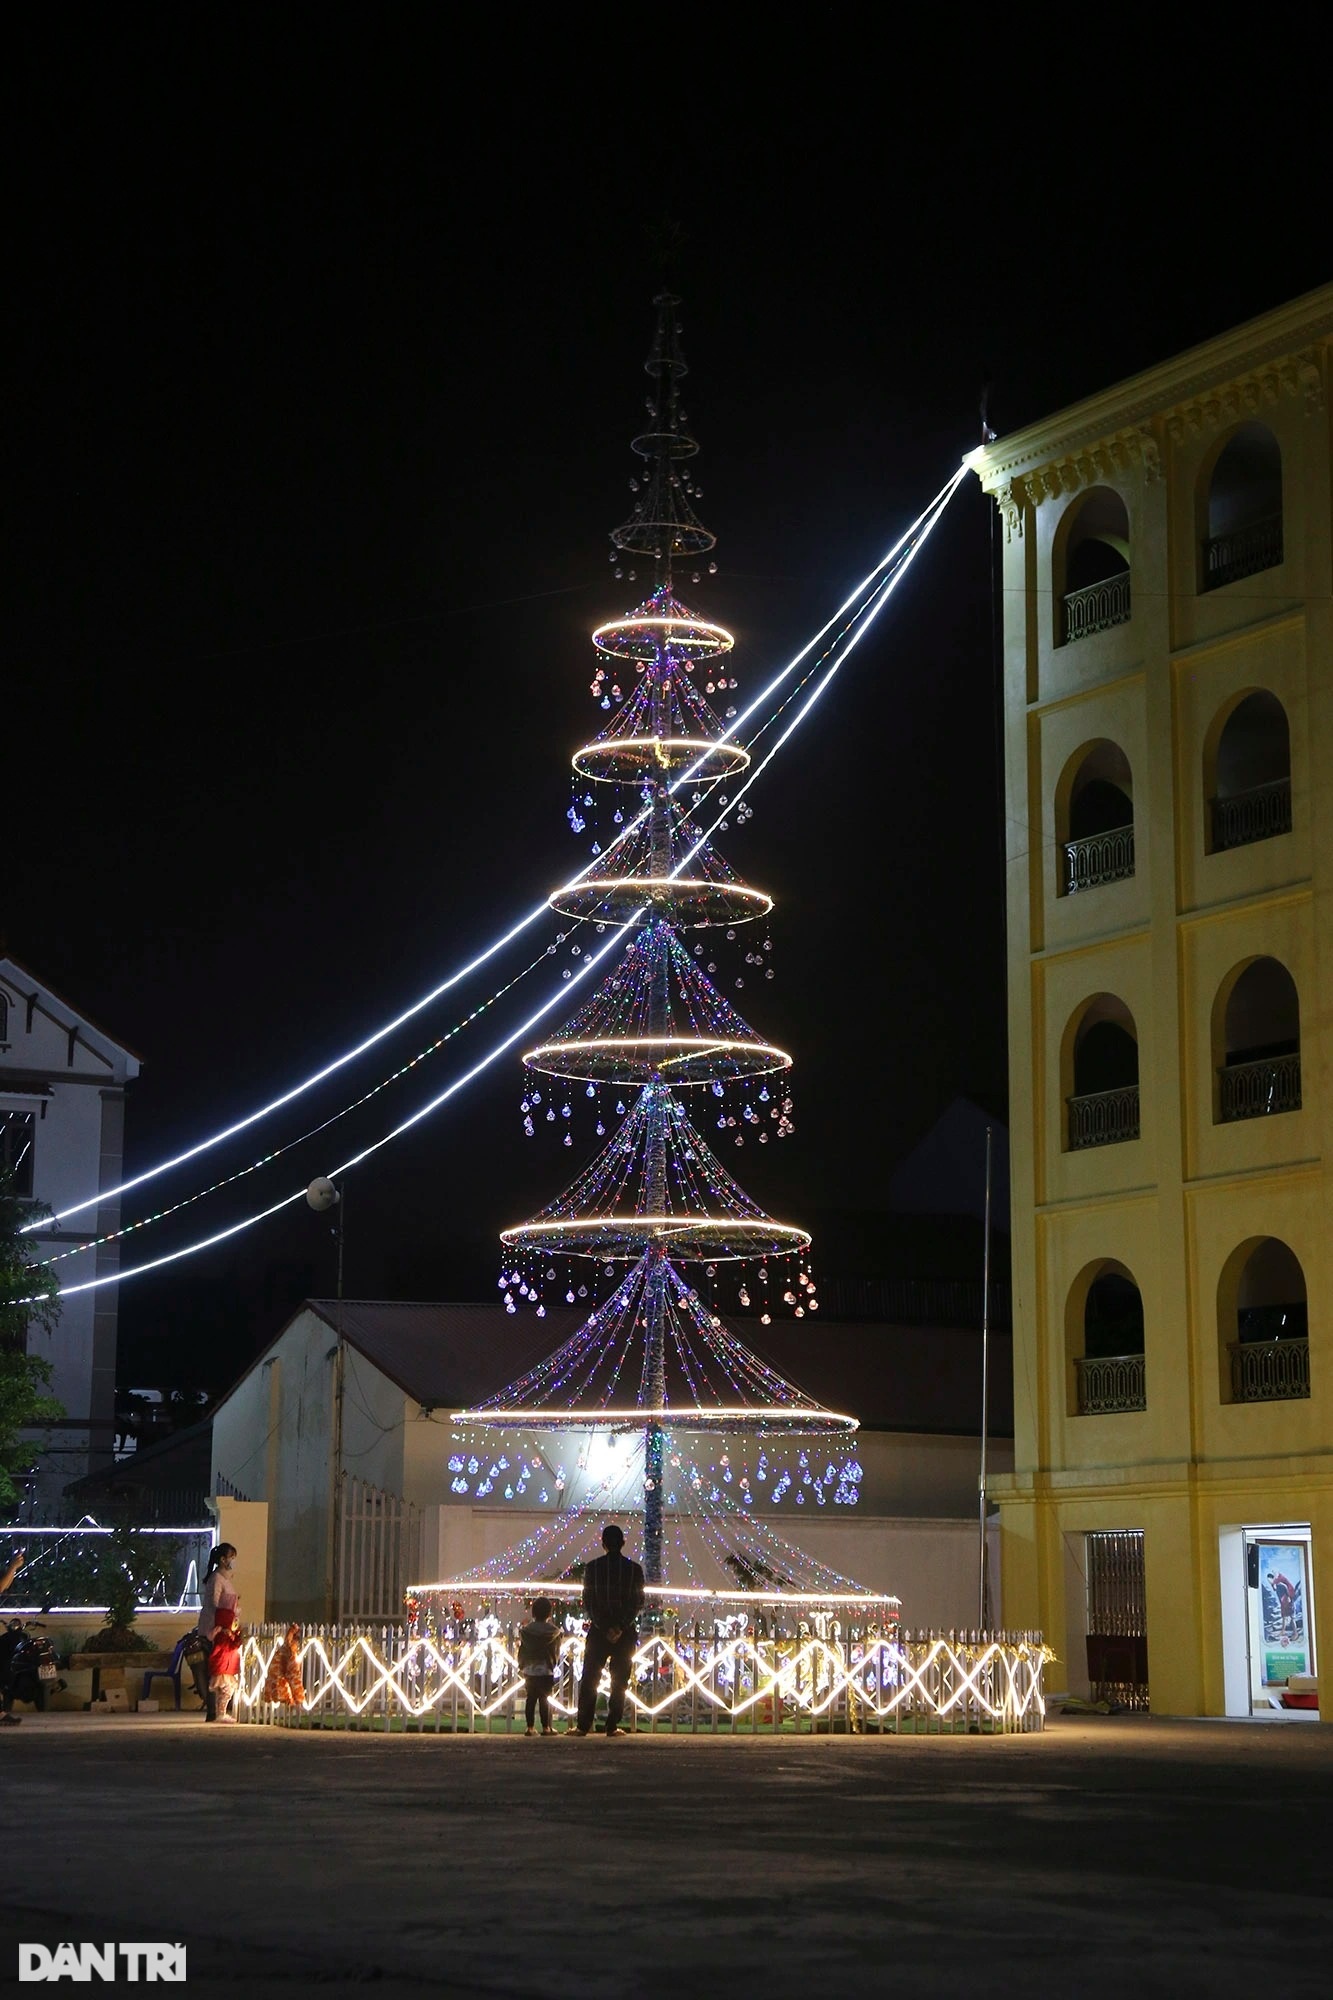 The village of more than 100 years old in Hanoi shimmers like a fairyland on Christmas - 6